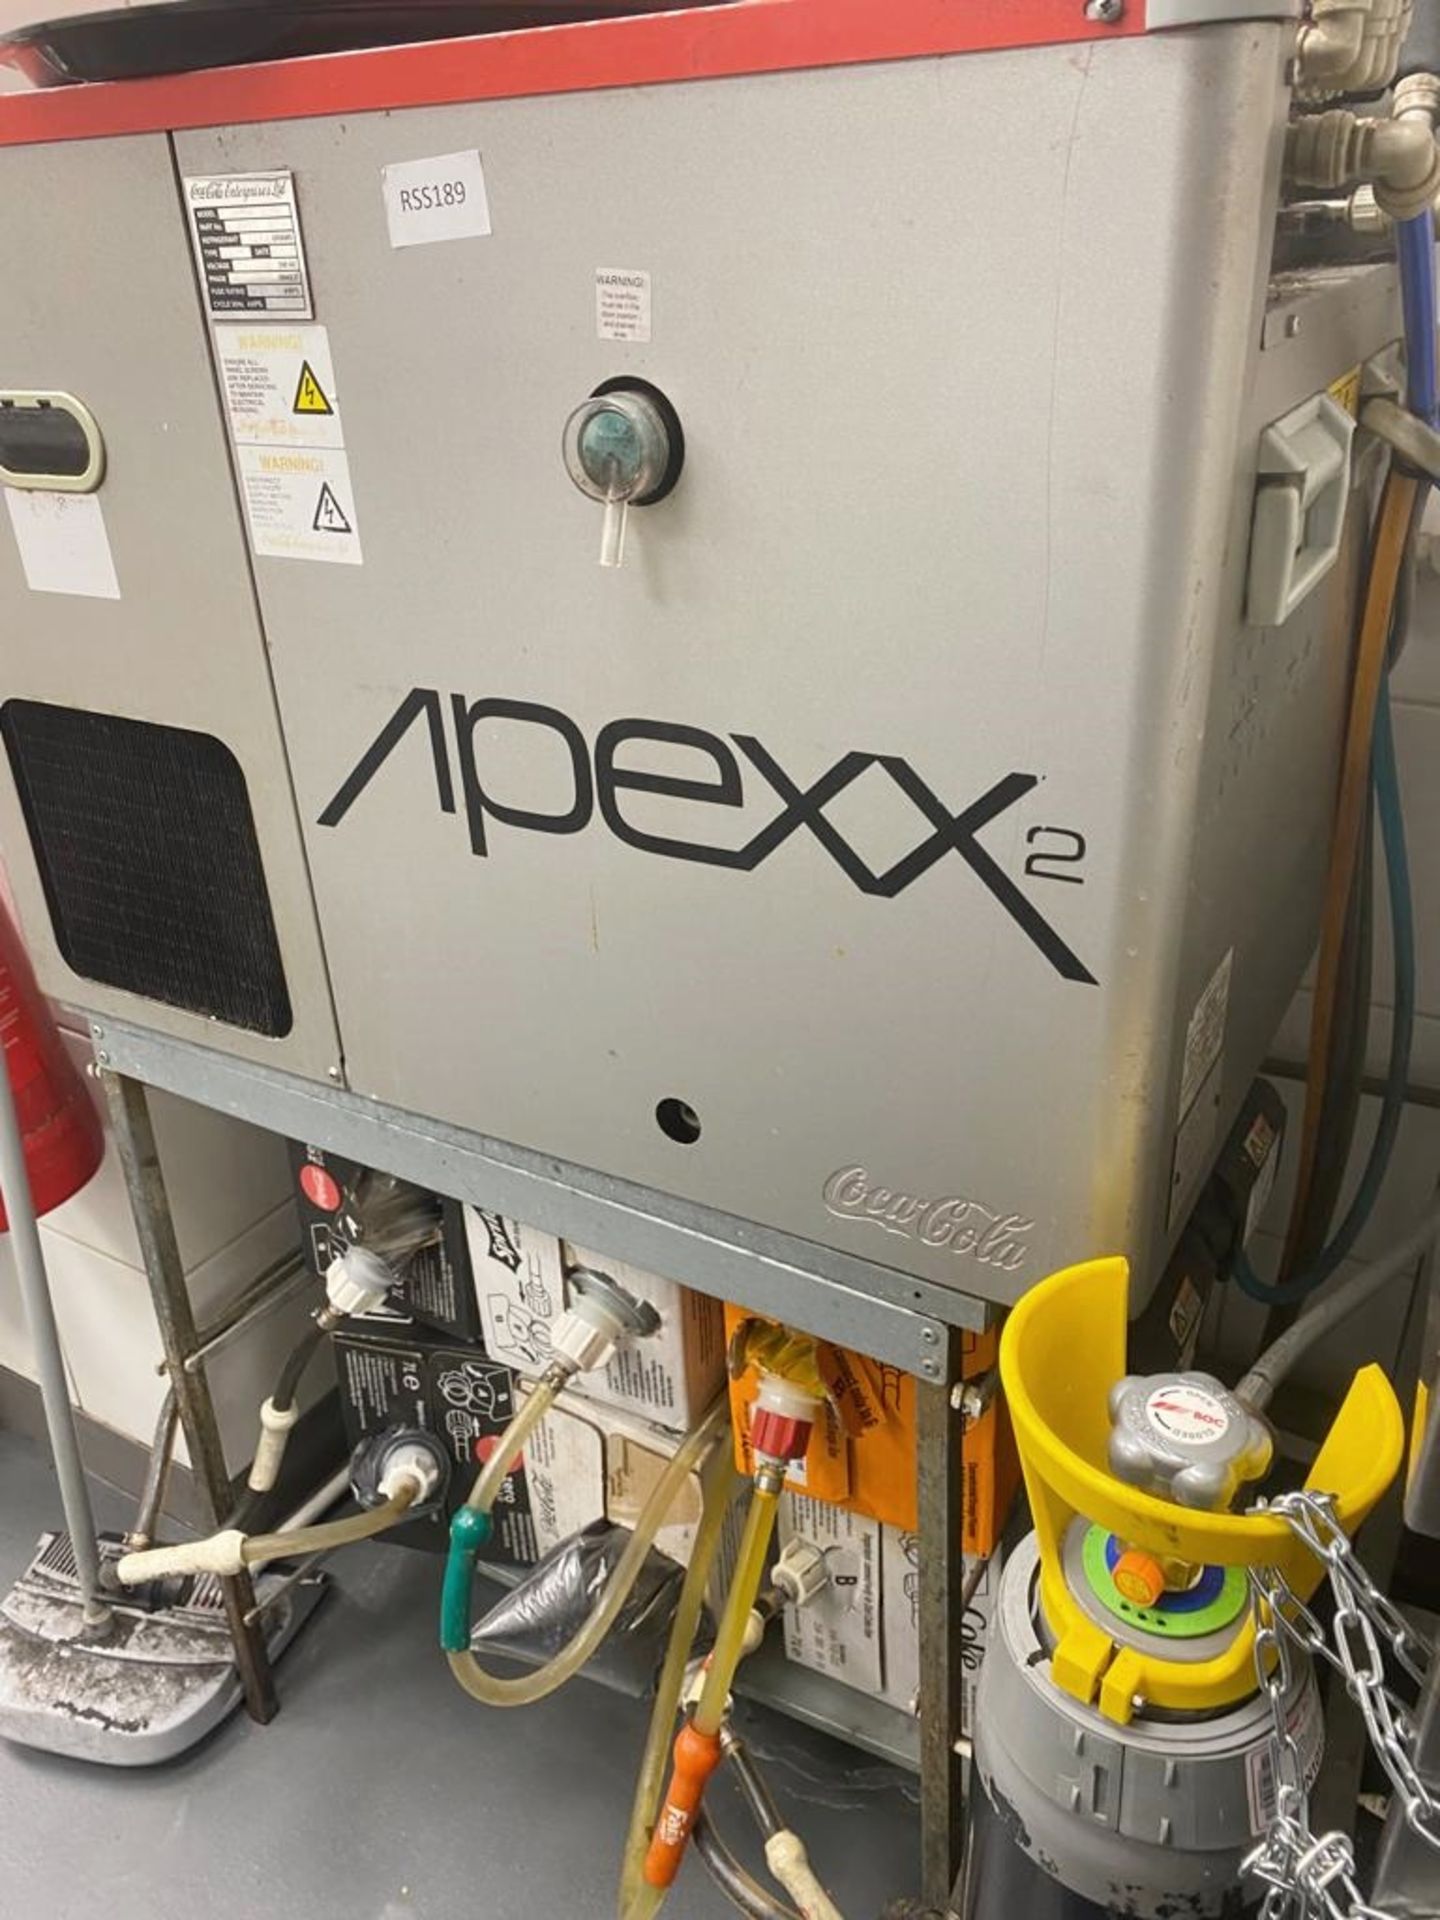 1 x Cornelius Apex Two Post Mix Drinks System With Dispenser Head As Shown , Full Working Order -